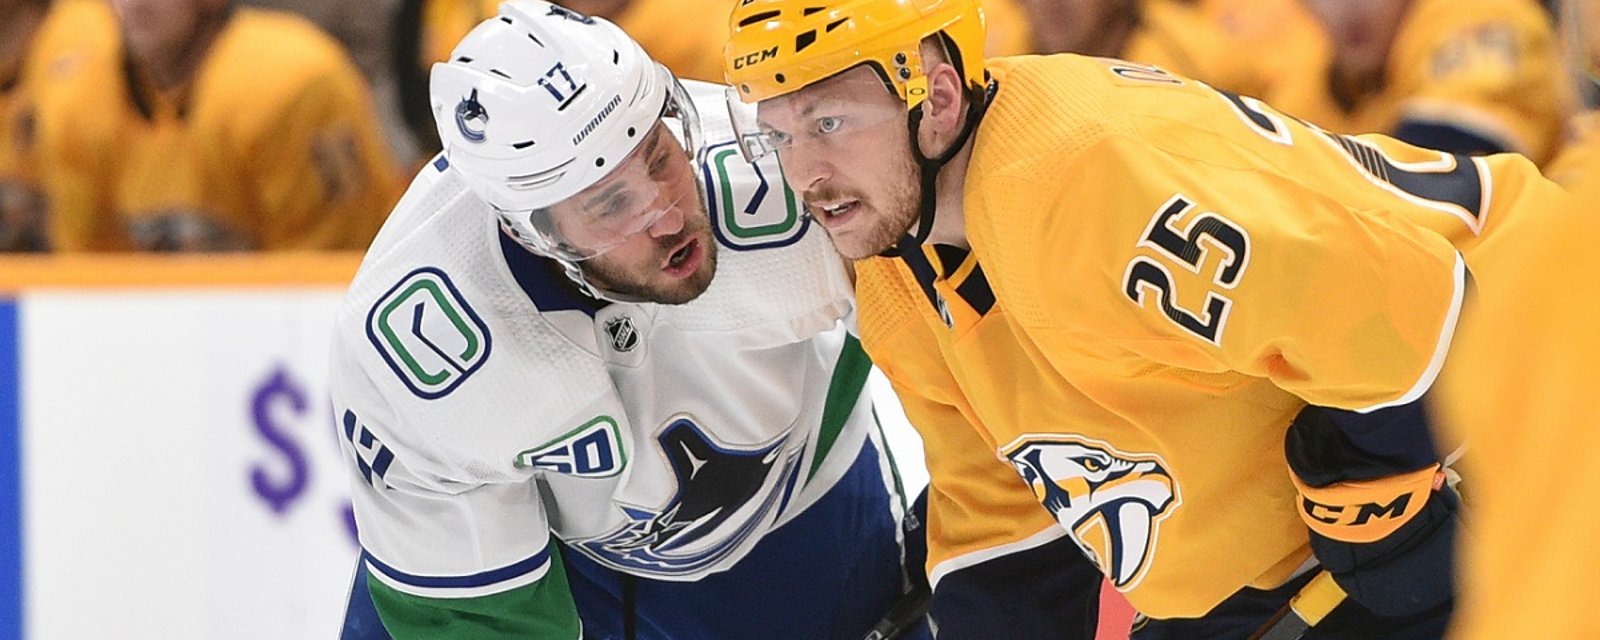 Rumor: Another former Canuck may be headed to Calgary.